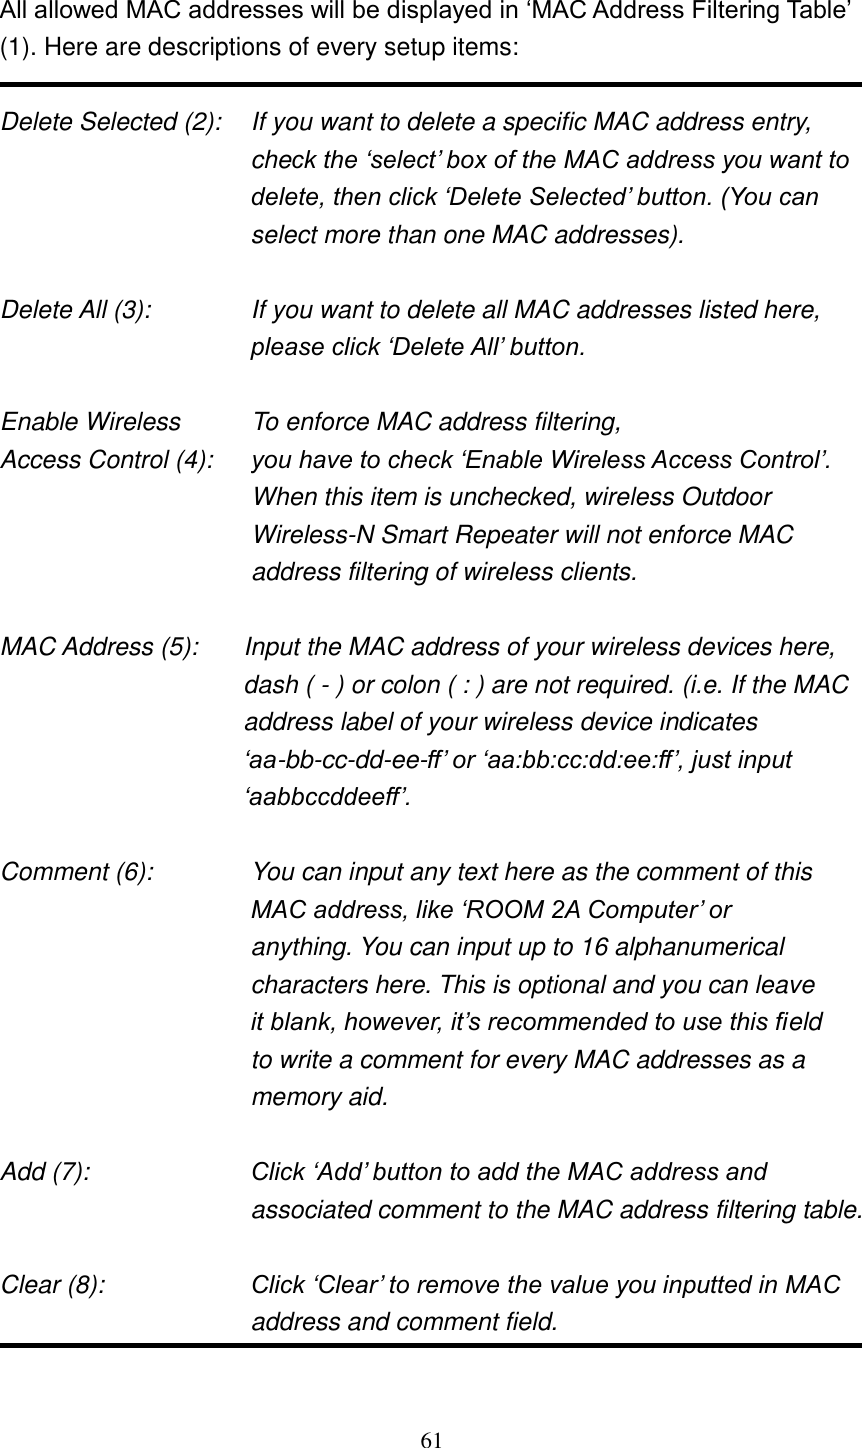 61  All allowed MAC addresses will be displayed in „MAC Address Filtering Table‟ (1). Here are descriptions of every setup items:  Delete Selected (2):    If you want to delete a specific MAC address entry, check the „select‟ box of the MAC address you want to delete, then click „Delete Selected‟ button. (You can select more than one MAC addresses).  Delete All (3):    If you want to delete all MAC addresses listed here, please click „Delete All‟ button.  Enable Wireless    To enforce MAC address filtering, Access Control (4):    you have to check „Enable Wireless Access Control‟. When this item is unchecked, wireless Outdoor Wireless-N Smart Repeater will not enforce MAC address filtering of wireless clients.  MAC Address (5):    Input the MAC address of your wireless devices here, dash ( - ) or colon ( : ) are not required. (i.e. If the MAC address label of your wireless device indicates „aa-bb-cc-dd-ee-ff‟ or „aa:bb:cc:dd:ee:ff‟, just input „aabbccddeeff‟.  Comment (6):      You can input any text here as the comment of this       MAC address, like „ROOM 2A Computer‟ or          anything. You can input up to 16 alphanumerical   characters here. This is optional and you can leave   it blank, however, it‟s recommended to use this field   to write a comment for every MAC addresses as a   memory aid.  Add (7):    Click „Add‟ button to add the MAC address and associated comment to the MAC address filtering table.  Clear (8):    Click „Clear‟ to remove the value you inputted in MAC address and comment field.  